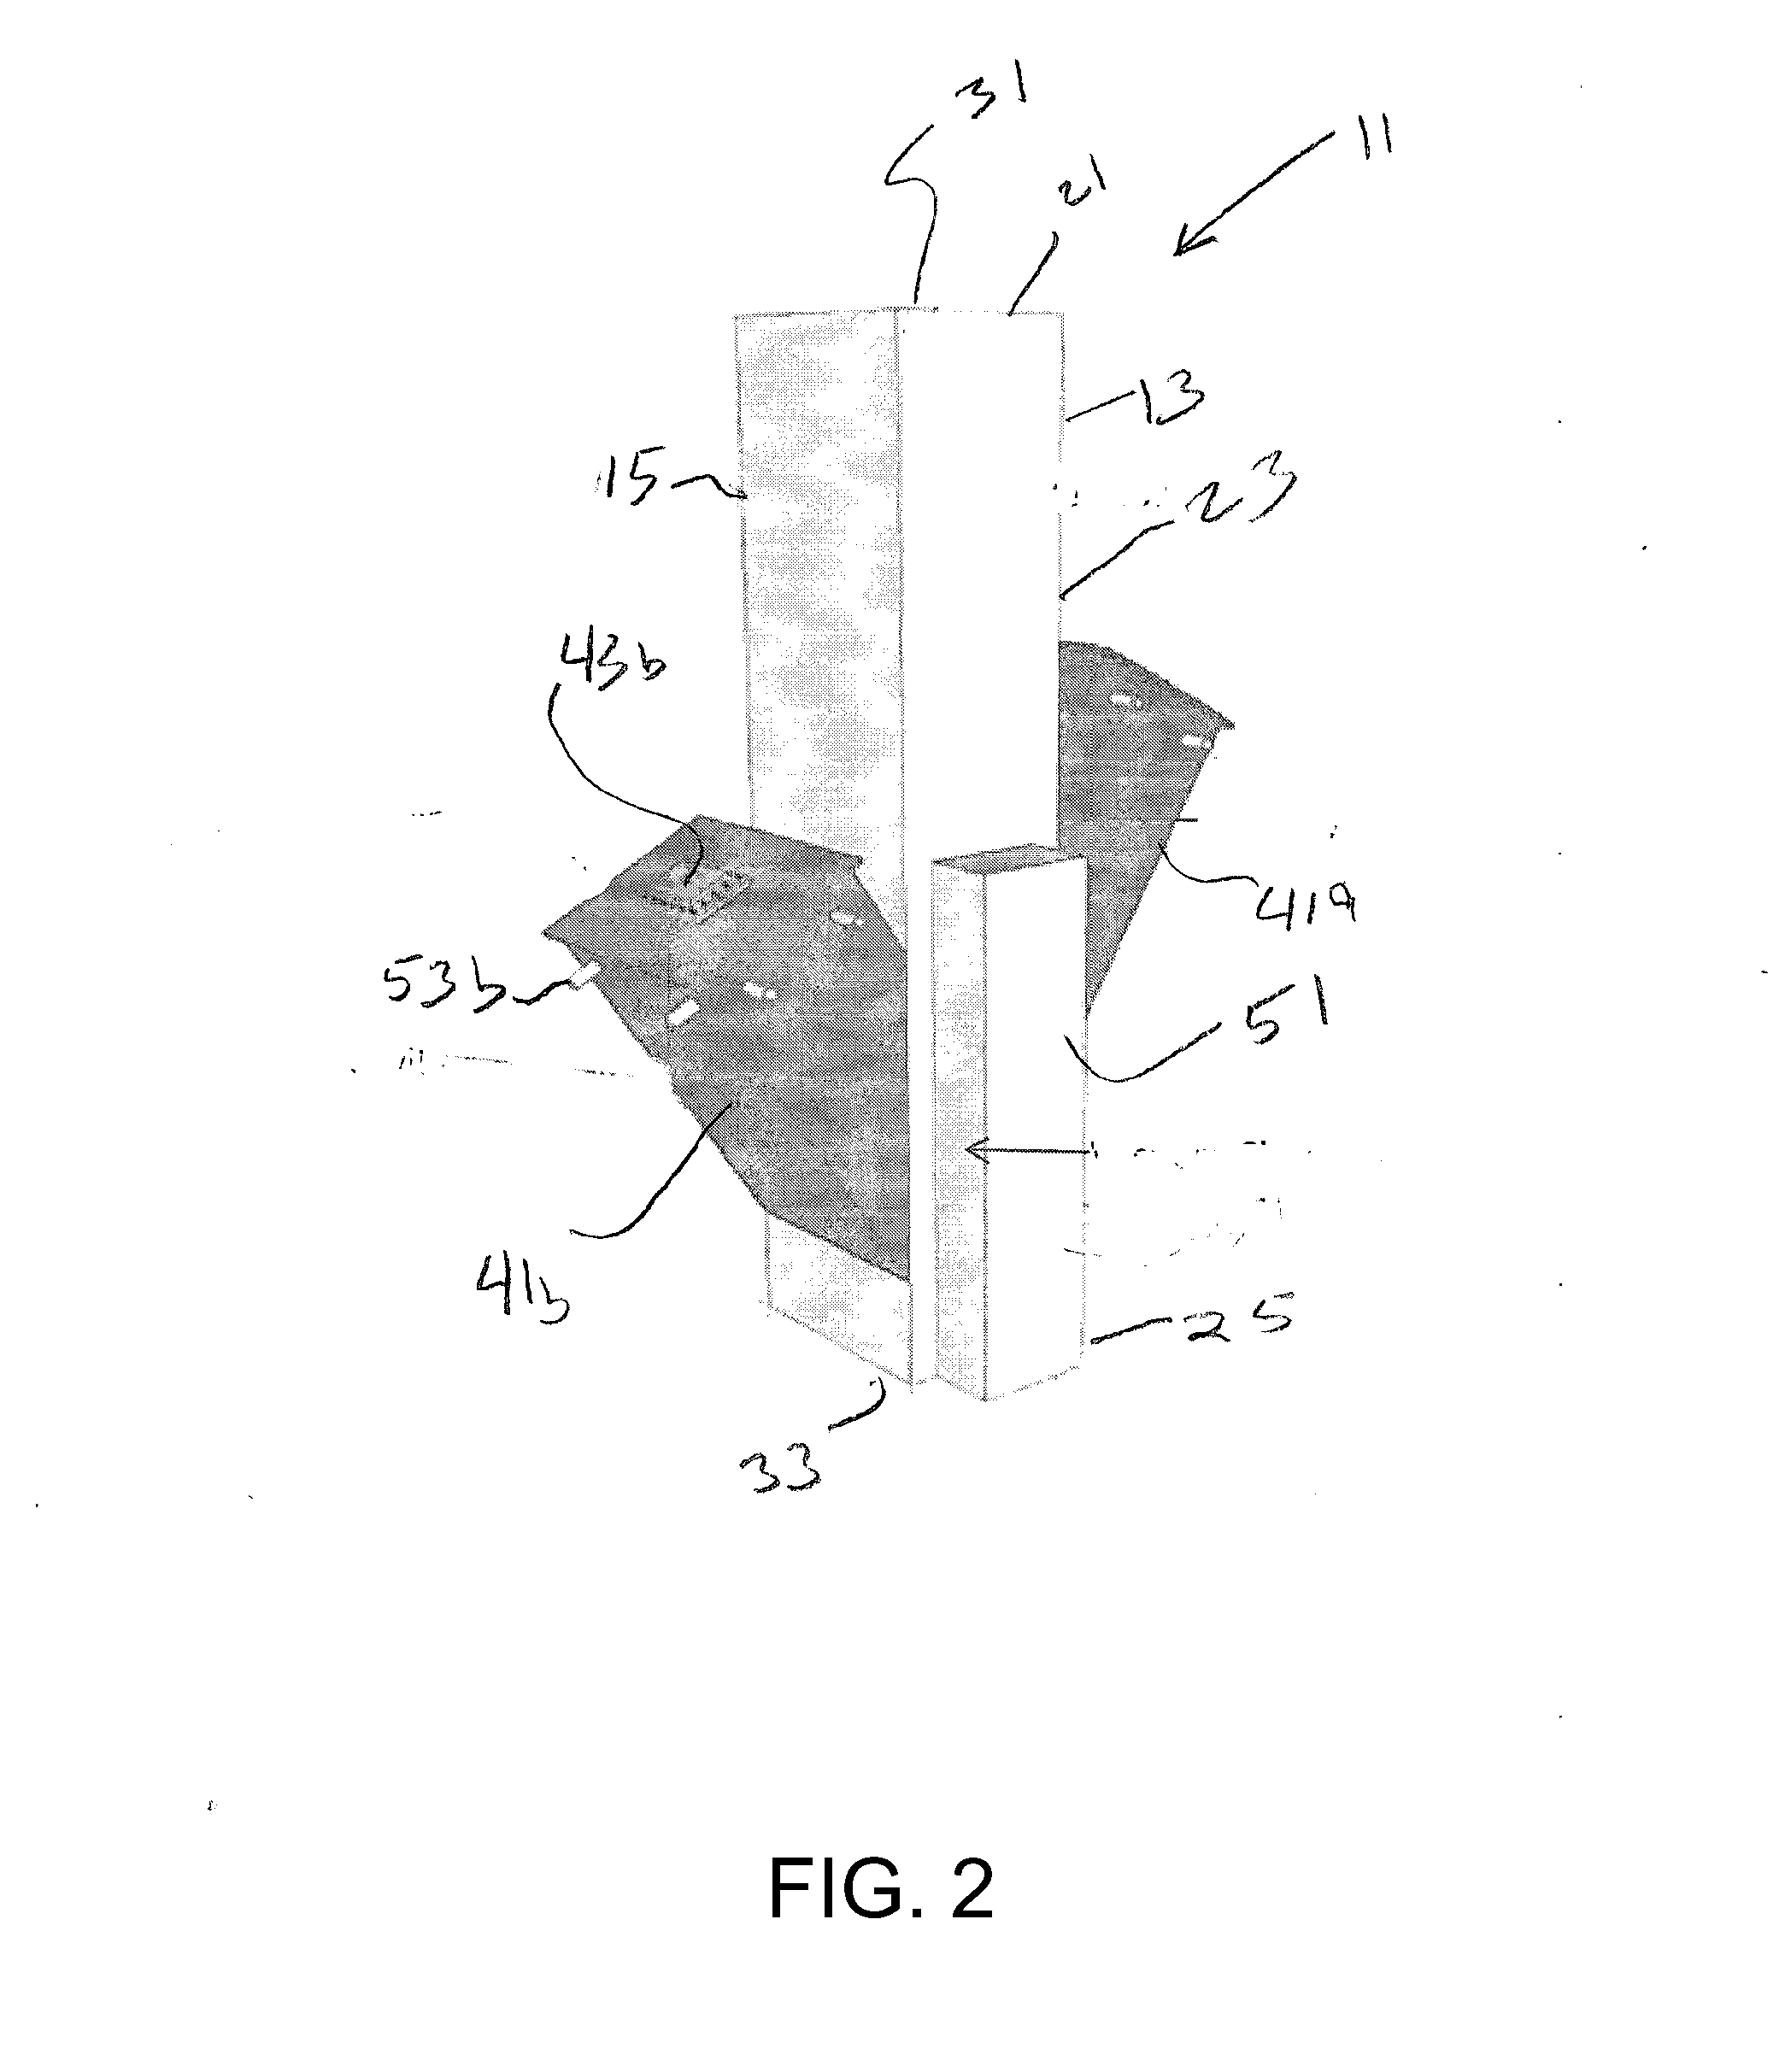 Apparatus and methods for treating solids by electromagnetic radiation